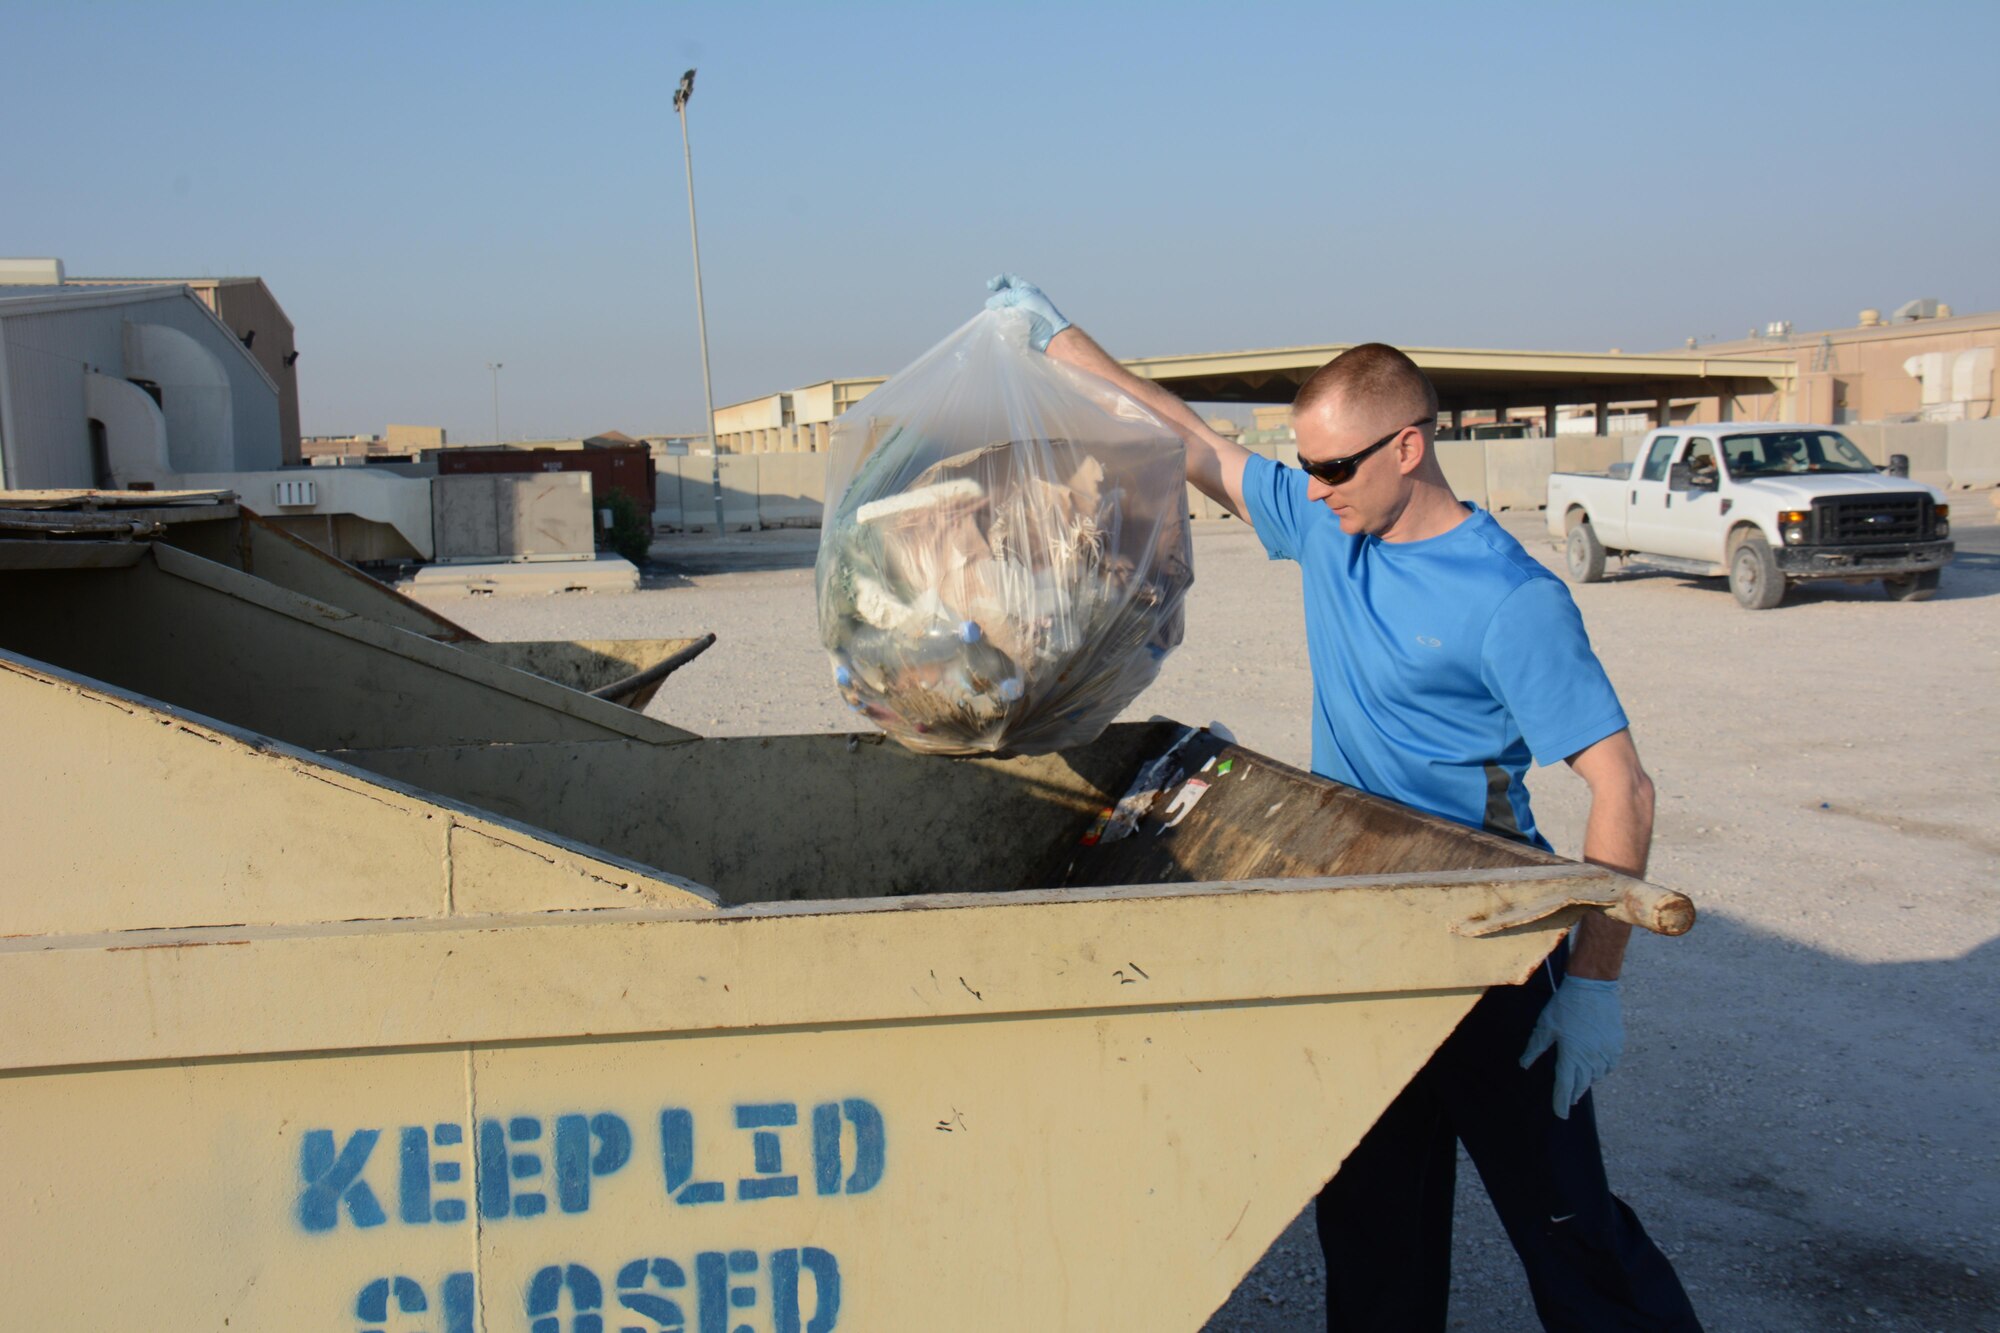 Tech. Sgt. David Stai, 379th Expeditionary Aircraft Maintenance Squadron section chief from Portland, Oregon, throws a trash bag into a dumpster during an Operation Community clean-up event at Al Udeid Air Base, Qatar Dec. 1. More than 70 volunteers took part in the event collecting 130 bags of trash in one hour. (U.S. Air Force photo by Tech. Sgt. James Hodgman/Released)